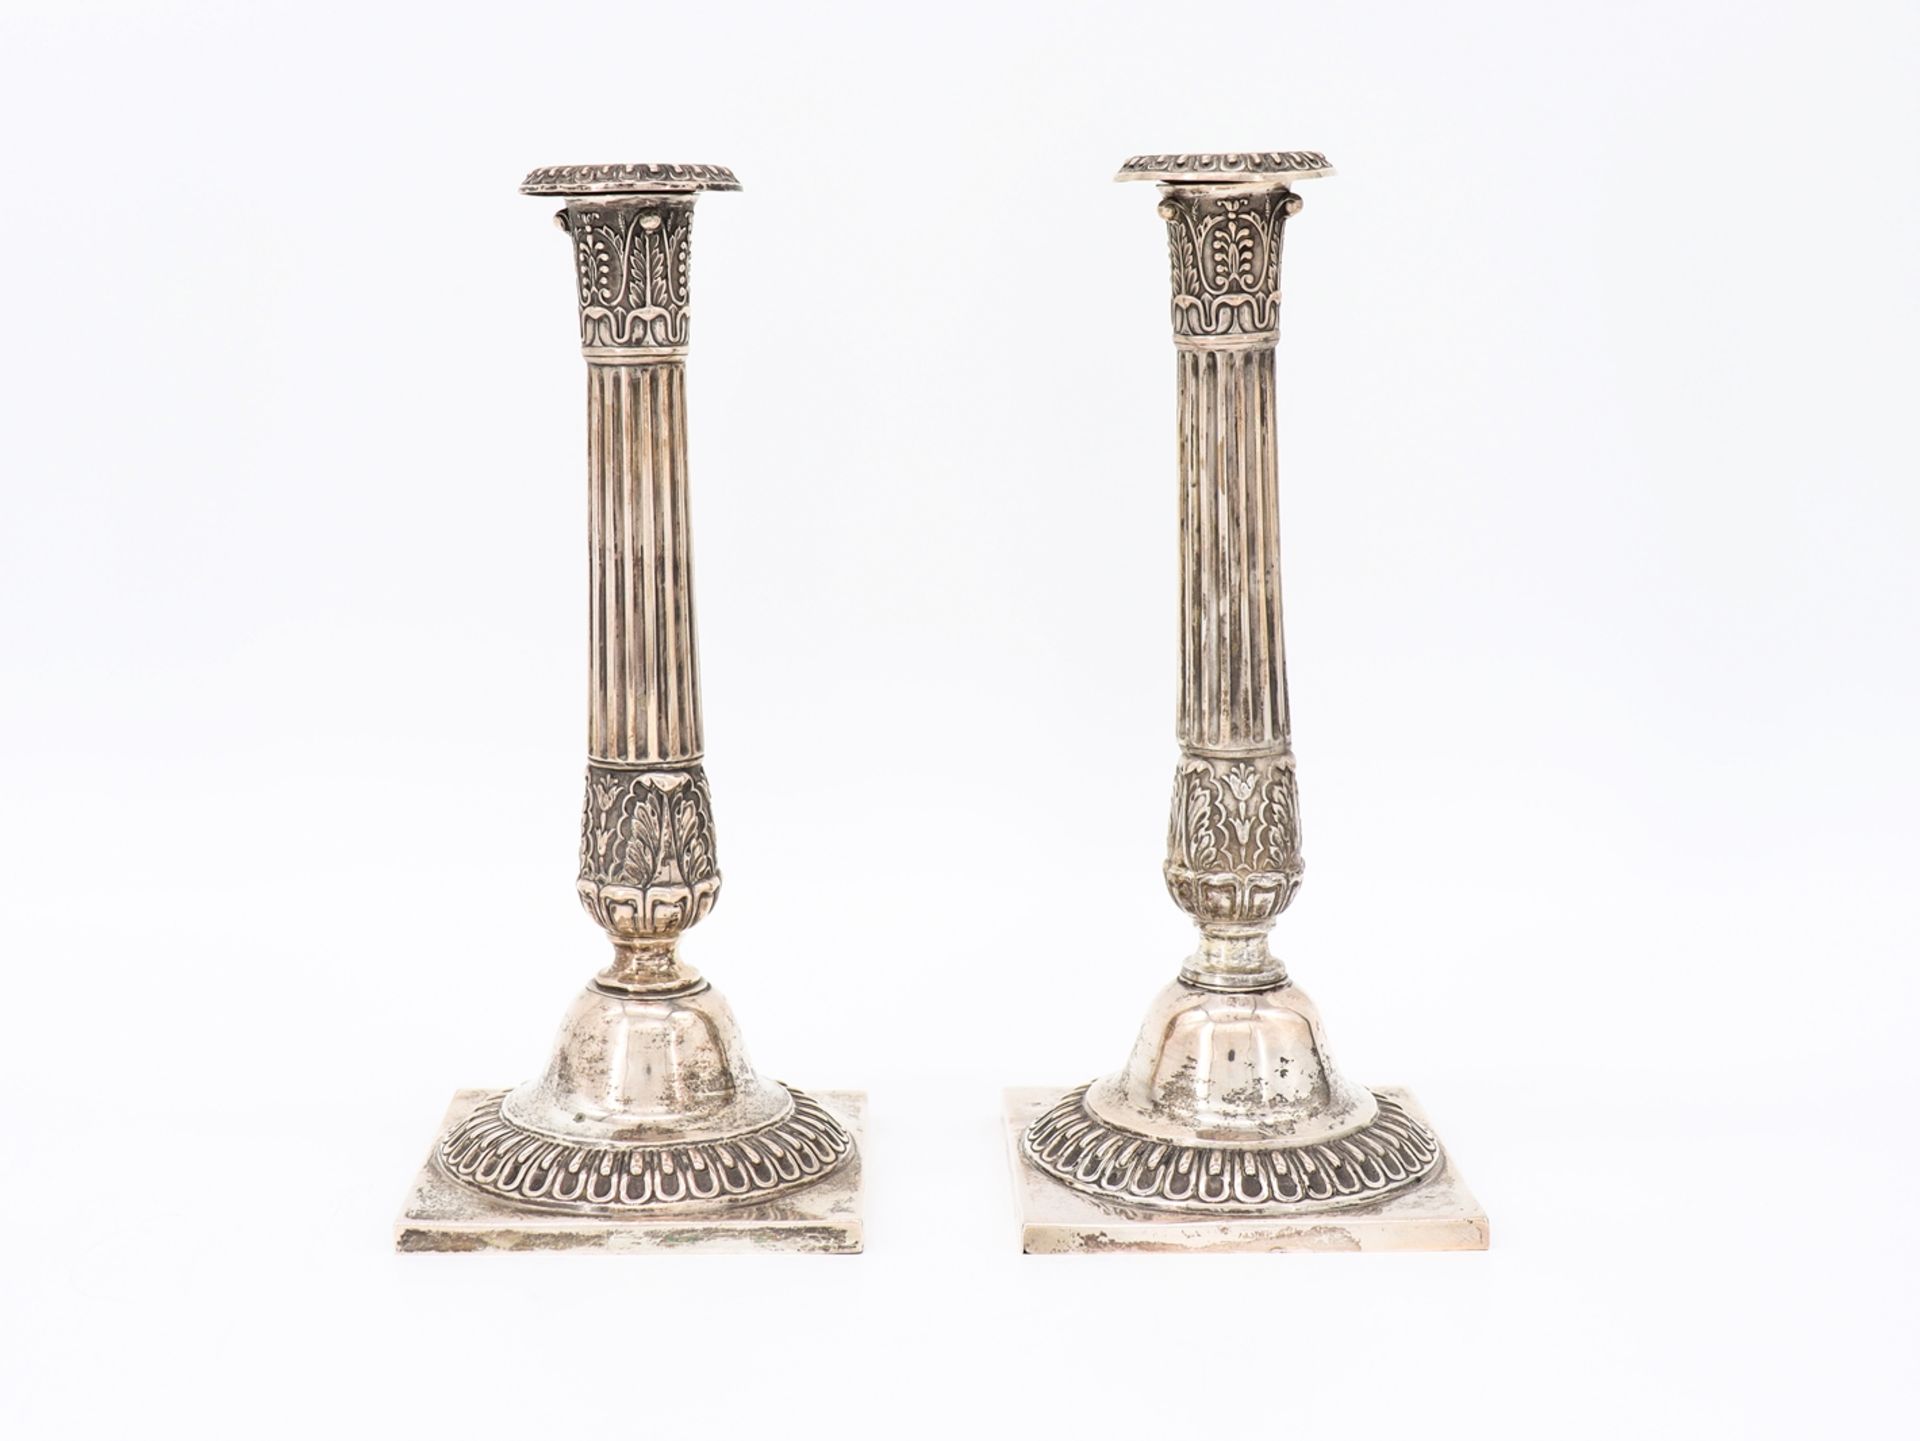 Anton Friedrich Burgmüller, Weissenfels, Pair of Empire candlesticks, early 19th century. - Image 2 of 7